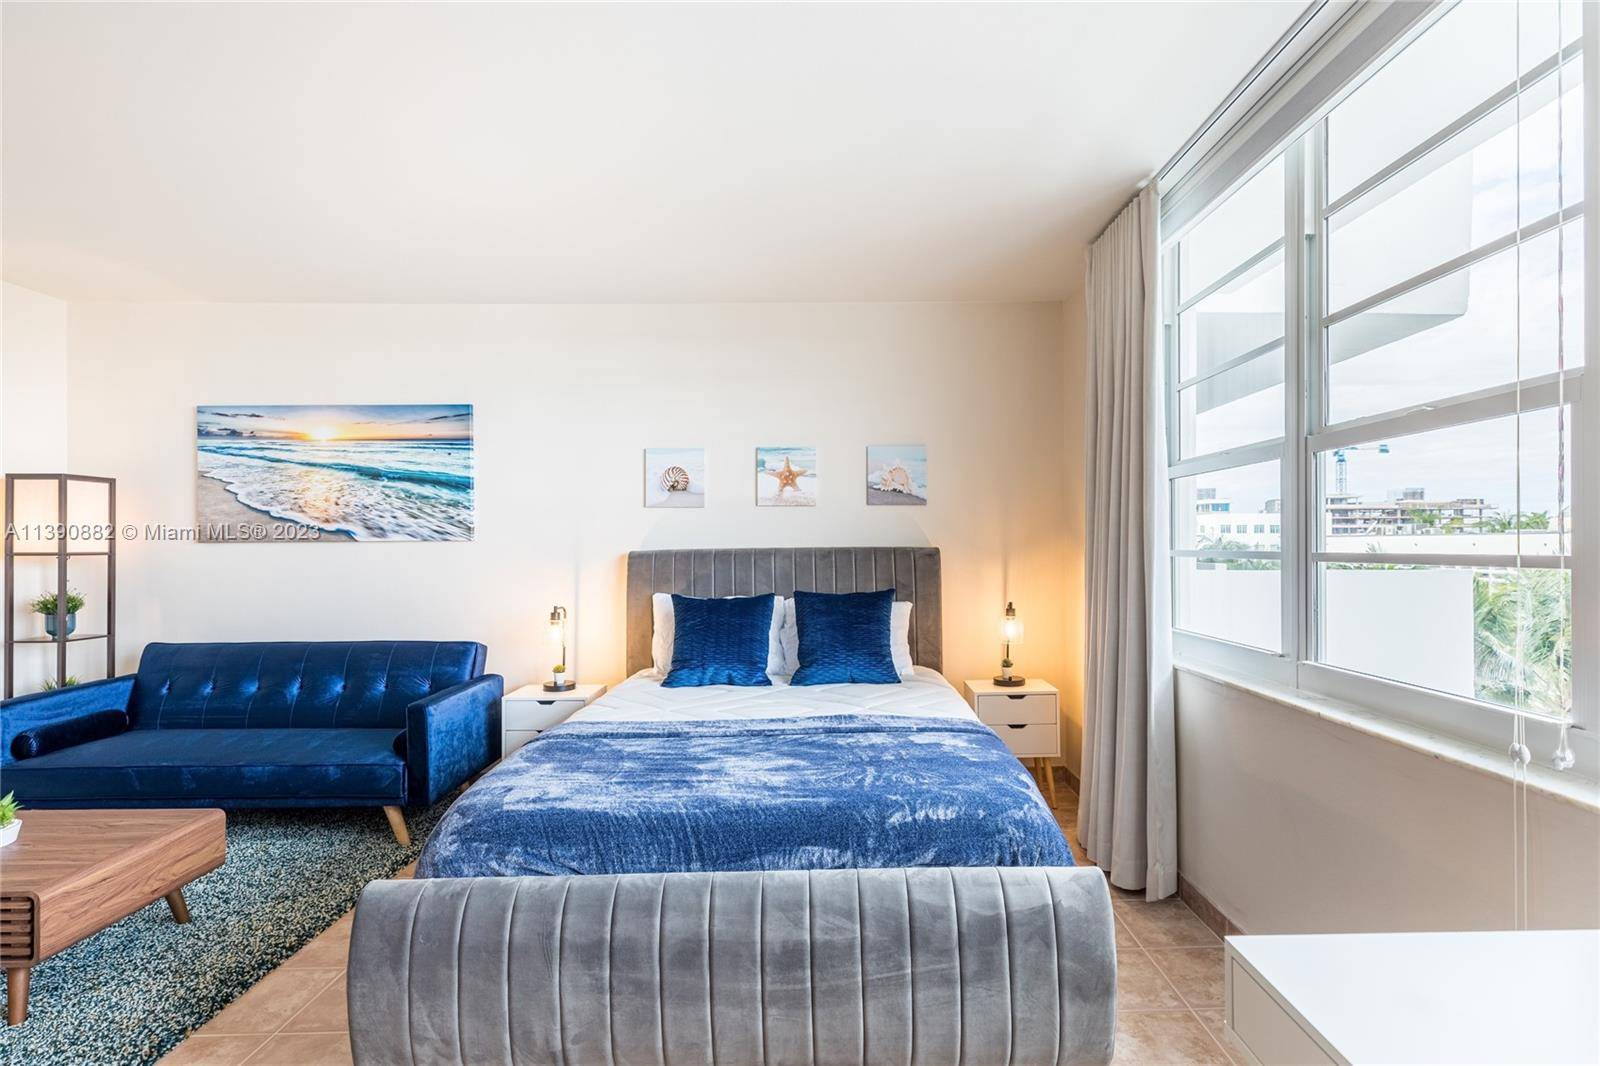 ENJOY OCEAN FRONT LIVING IN THIS STYLISH DESIGNER FURNISHED SPACIOUS STUDIO WITH LARGE WINDOWS AND LOT'S OF NATURAL LIGHT.